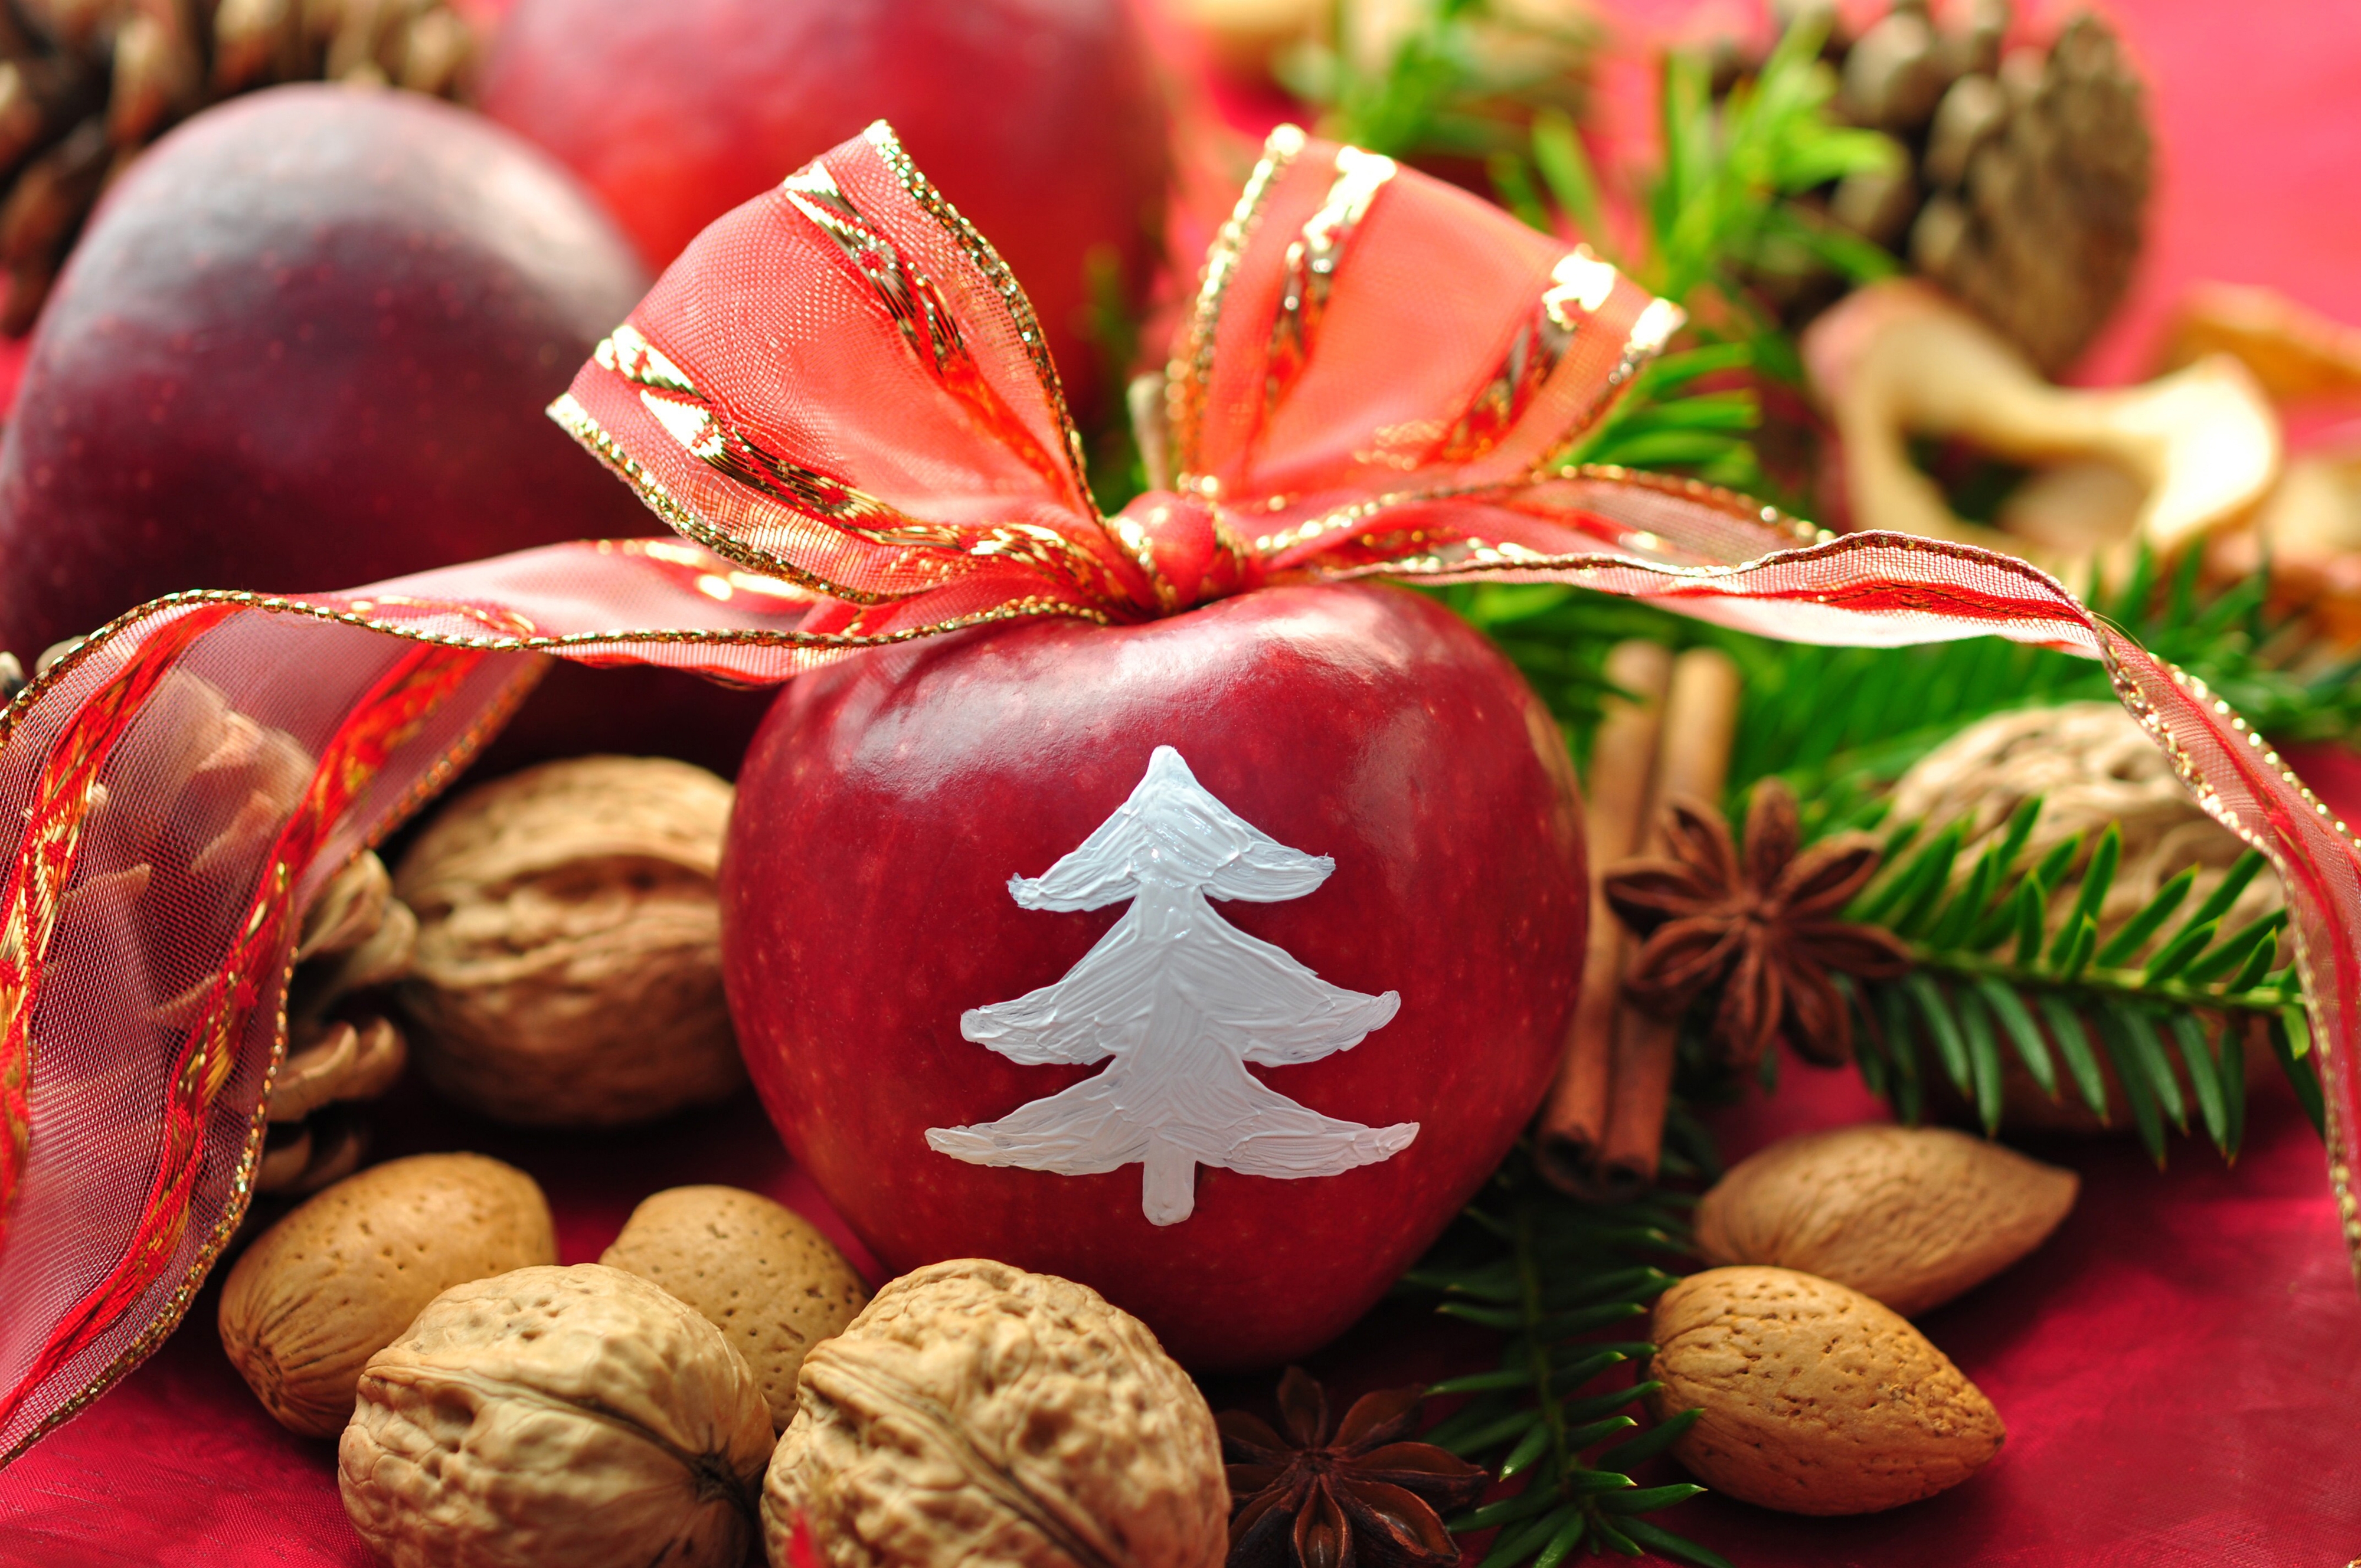 90134 download wallpaper food, cones, new year, apples, cinnamon, nuts, holiday, table, needles, bow, tape, decor screensavers and pictures for free